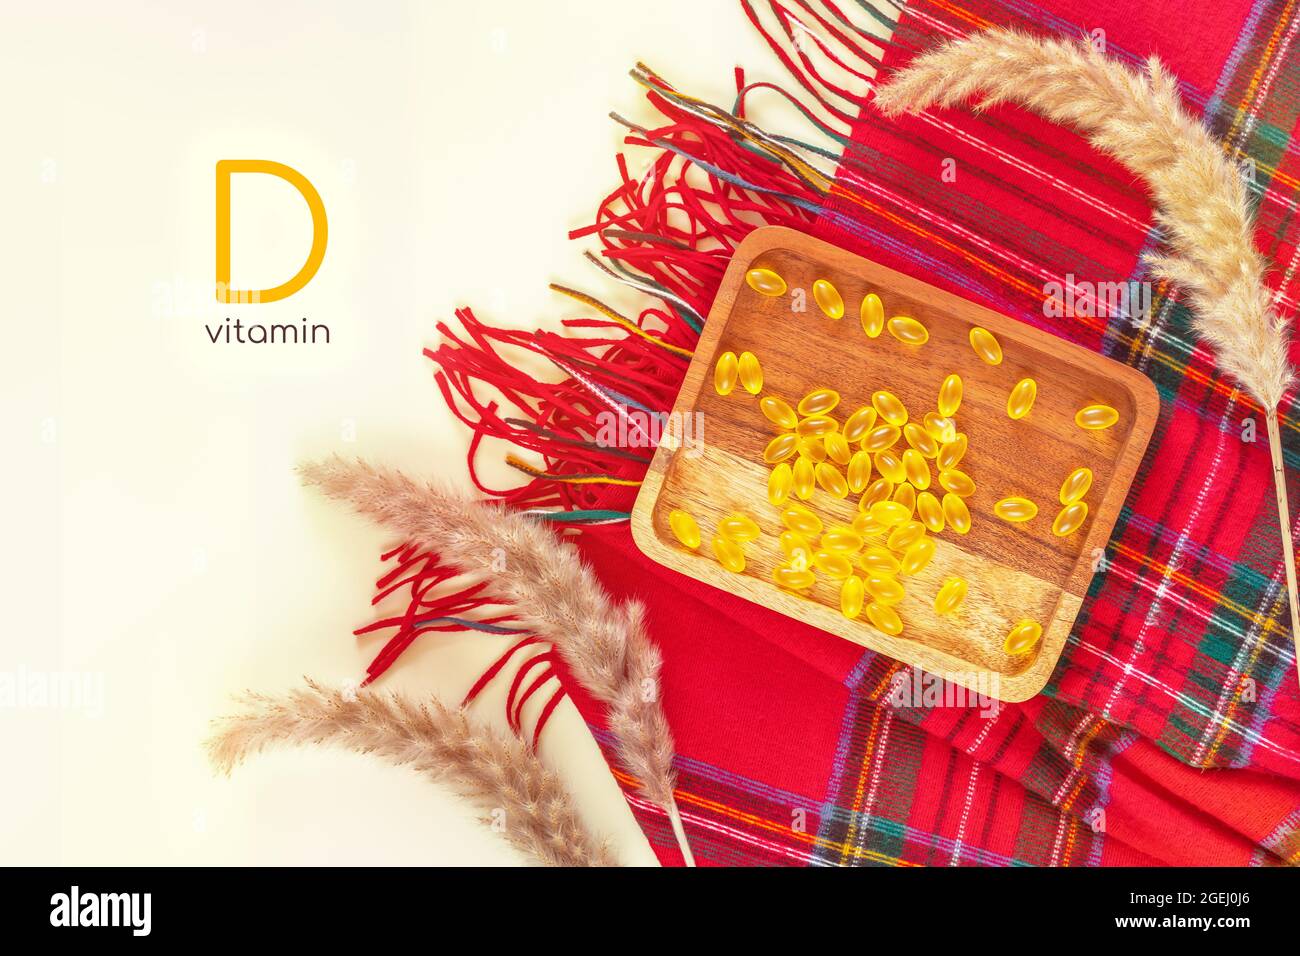 Horizontal banner with vitamin d teme. Autumn composition with wooden plate with yellow vitamin gel capsules, red cashmere palatine and dried flowers Stock Photo